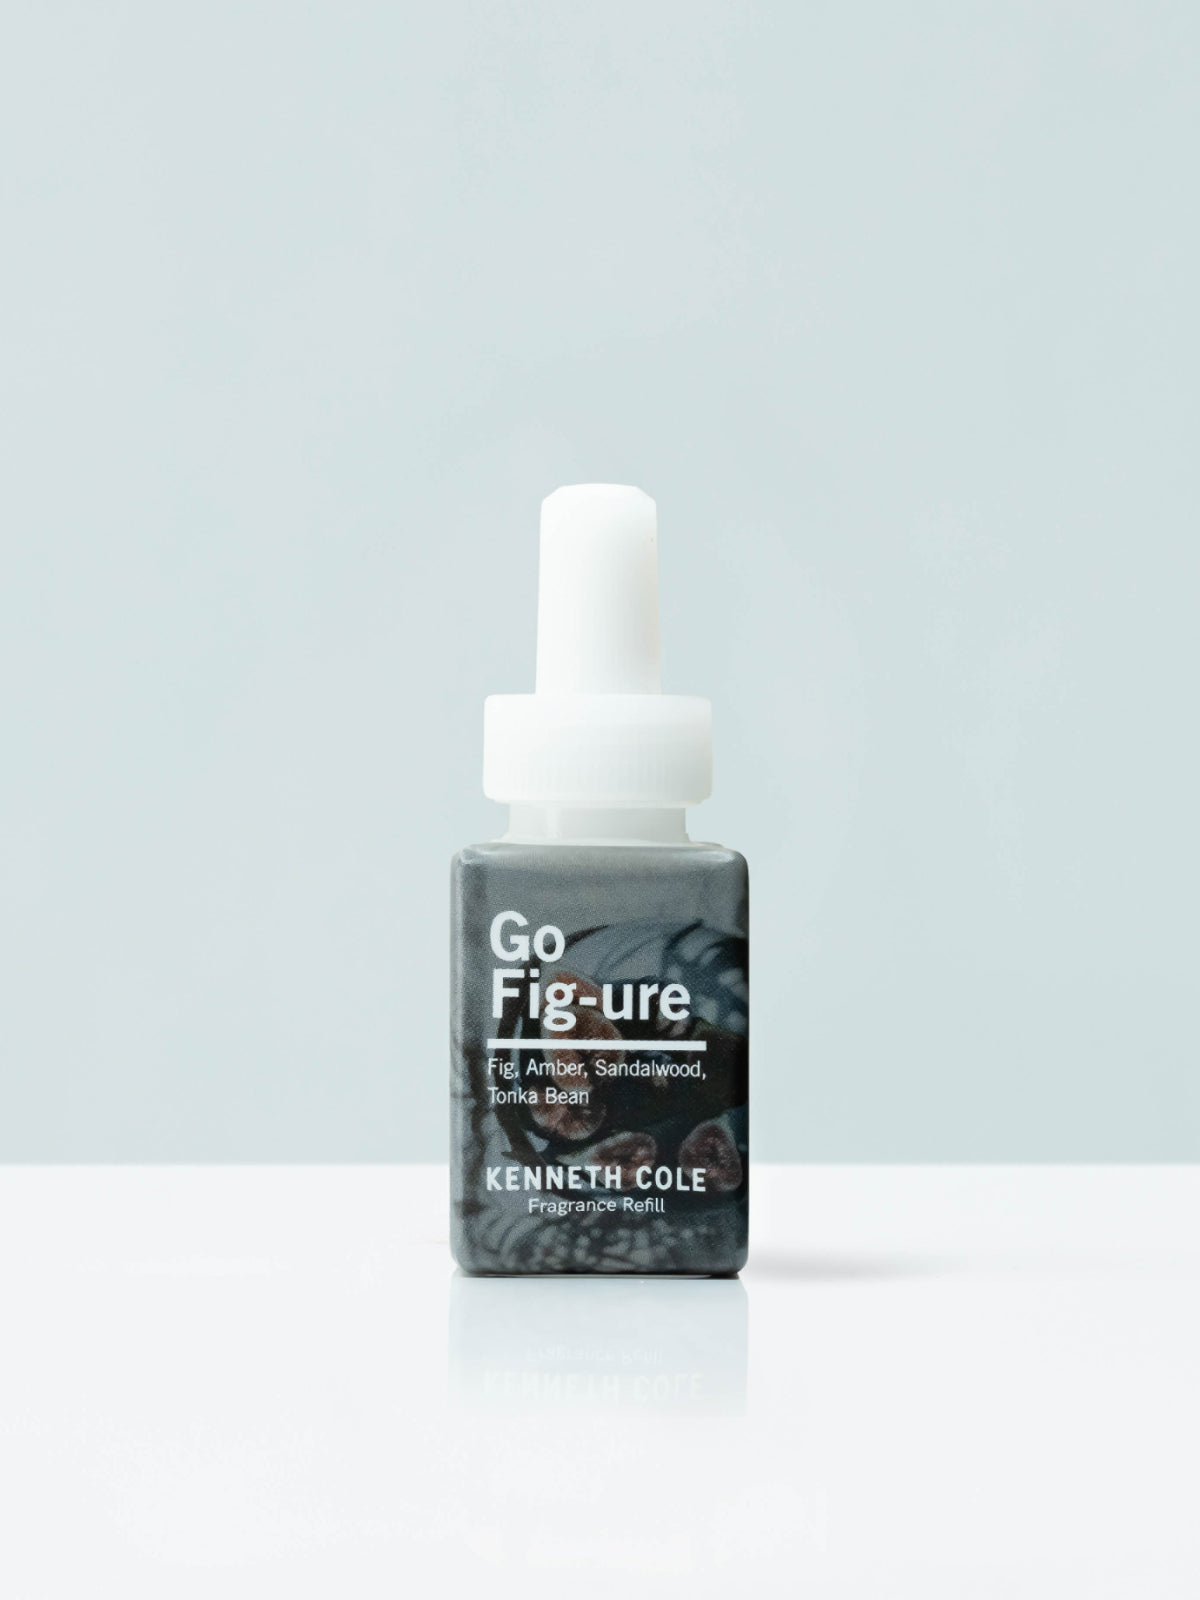 Go Fig-ure Pura Fragrance Refill by Kenneth Cole